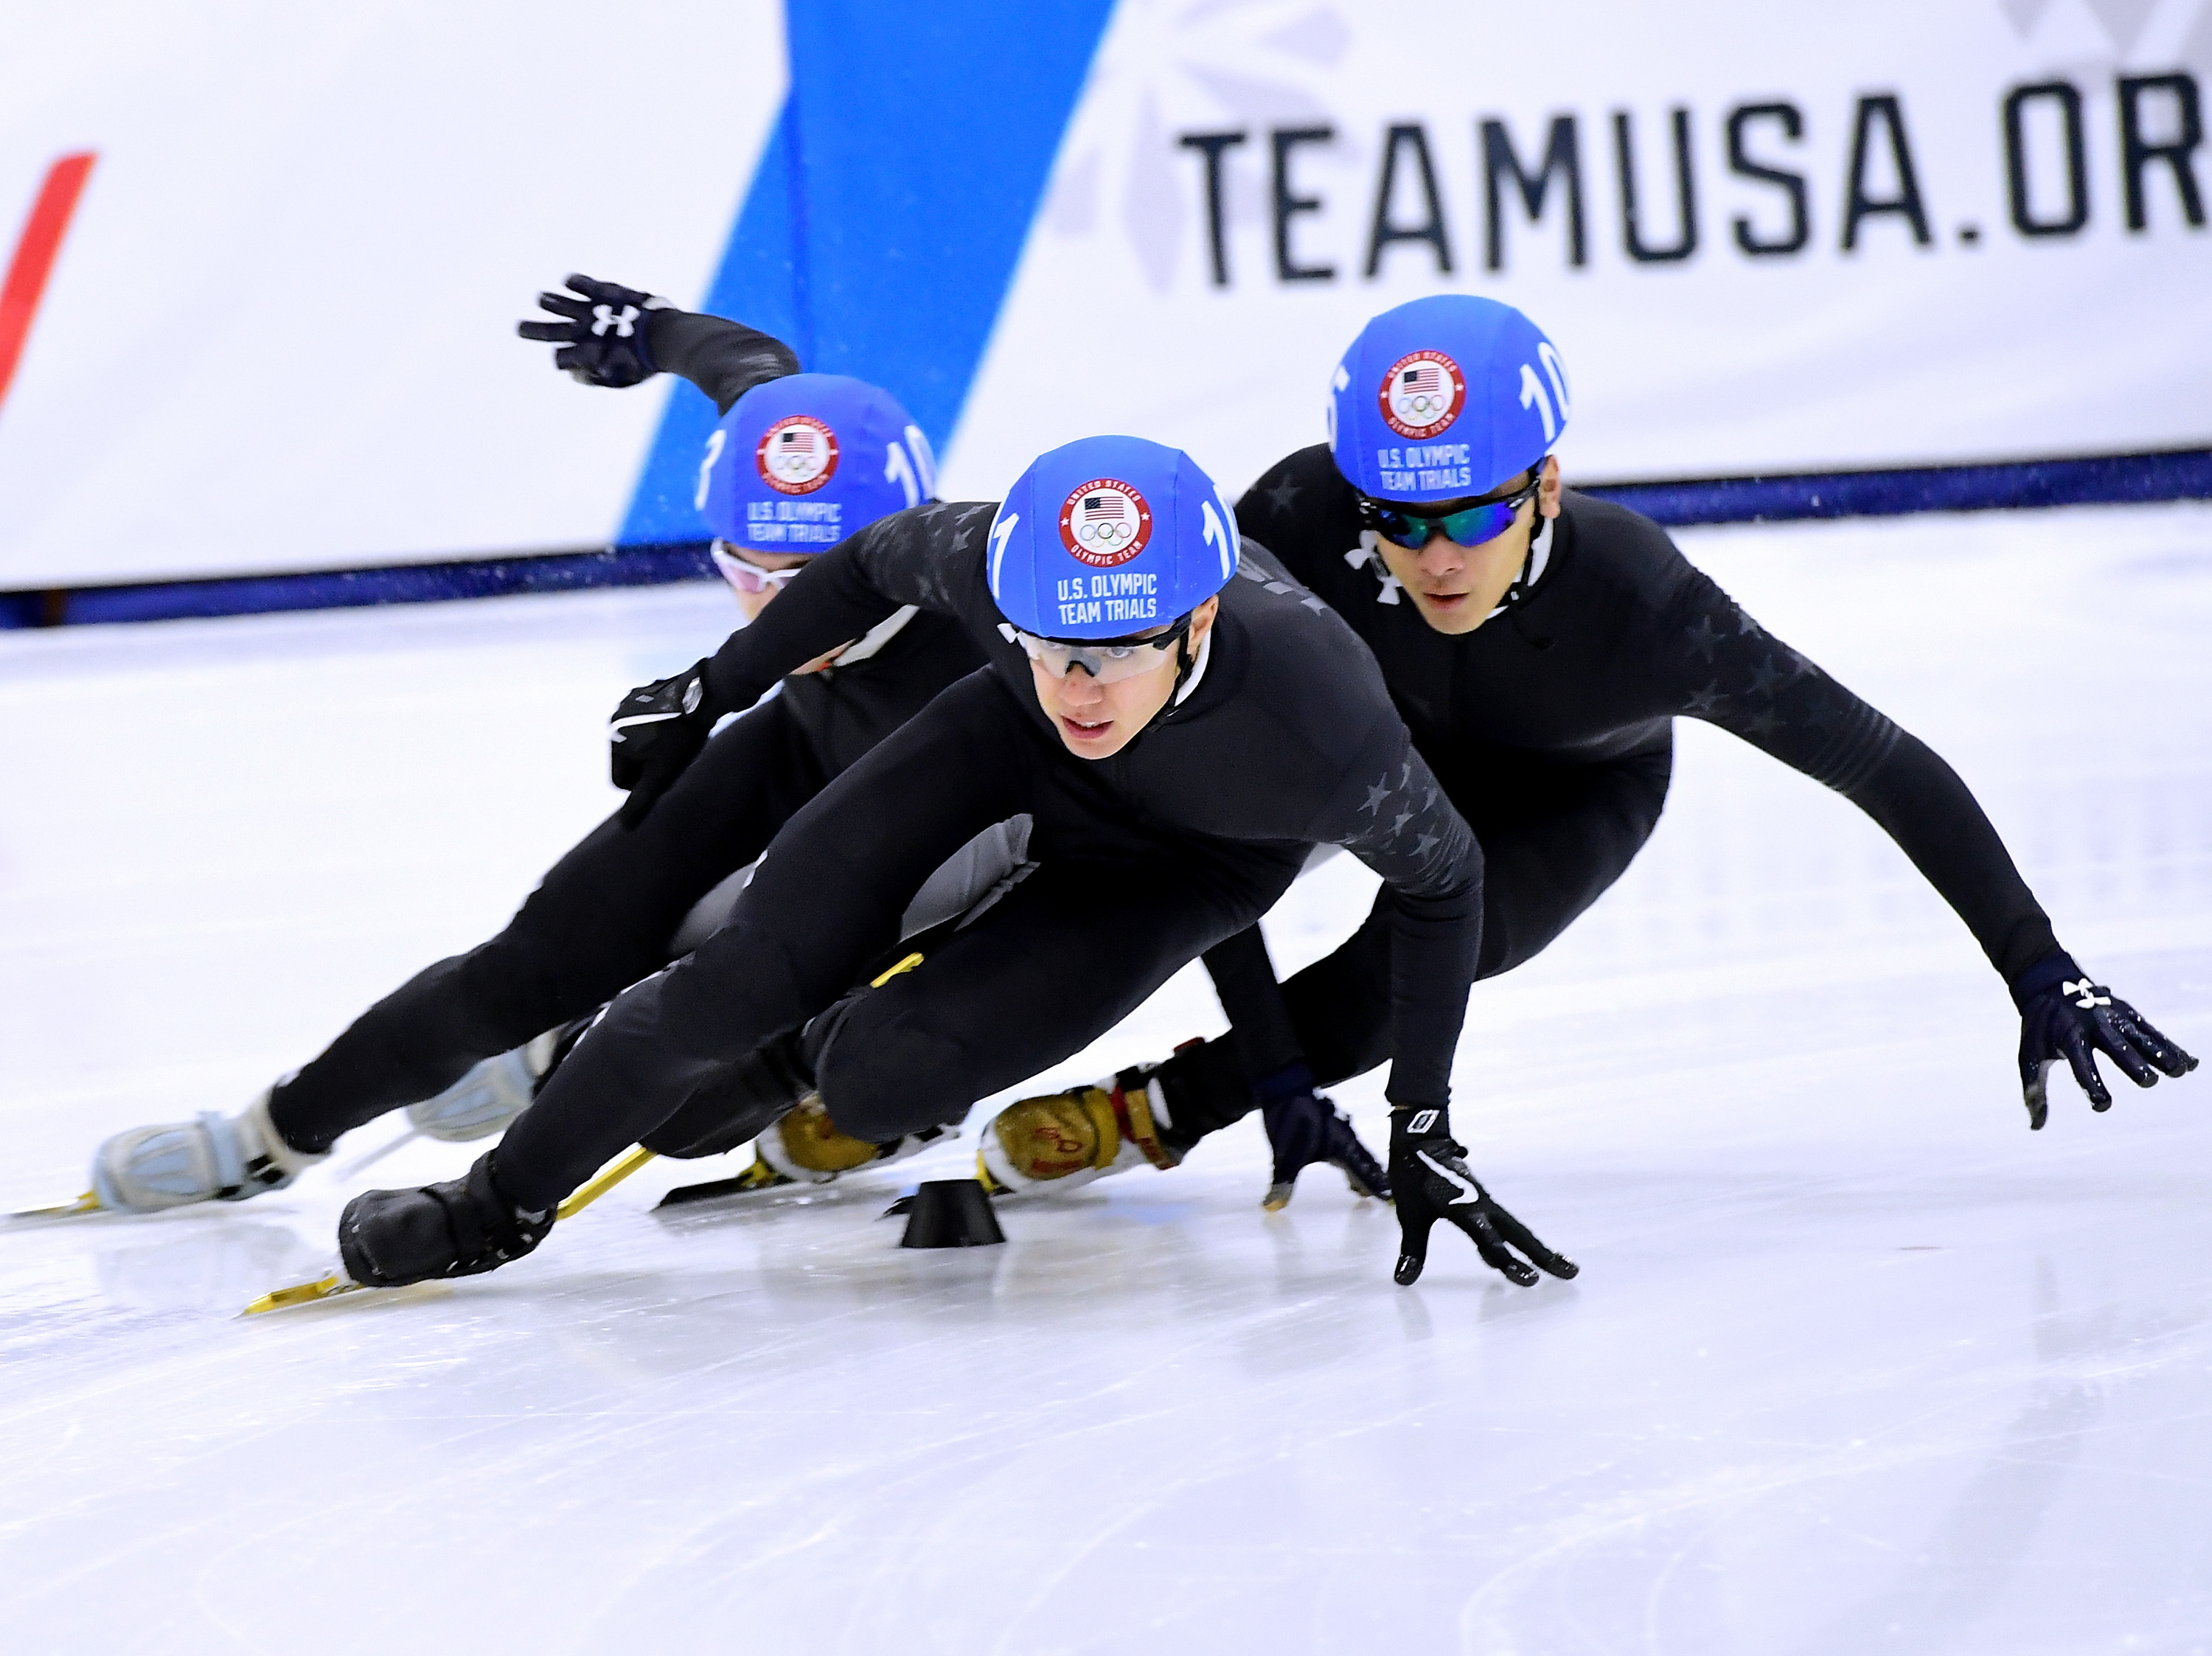 J.R. Celski #102 turns ahead of Aaron Tran #105 during the 2018 U.S. Speedskating Short Track Olympic Team Trials at the Utah Olympic Oval on December 17, 2017 in Salt Lake City, Utah. Harry How—Getty Images. (Harry How—Getty Images.)